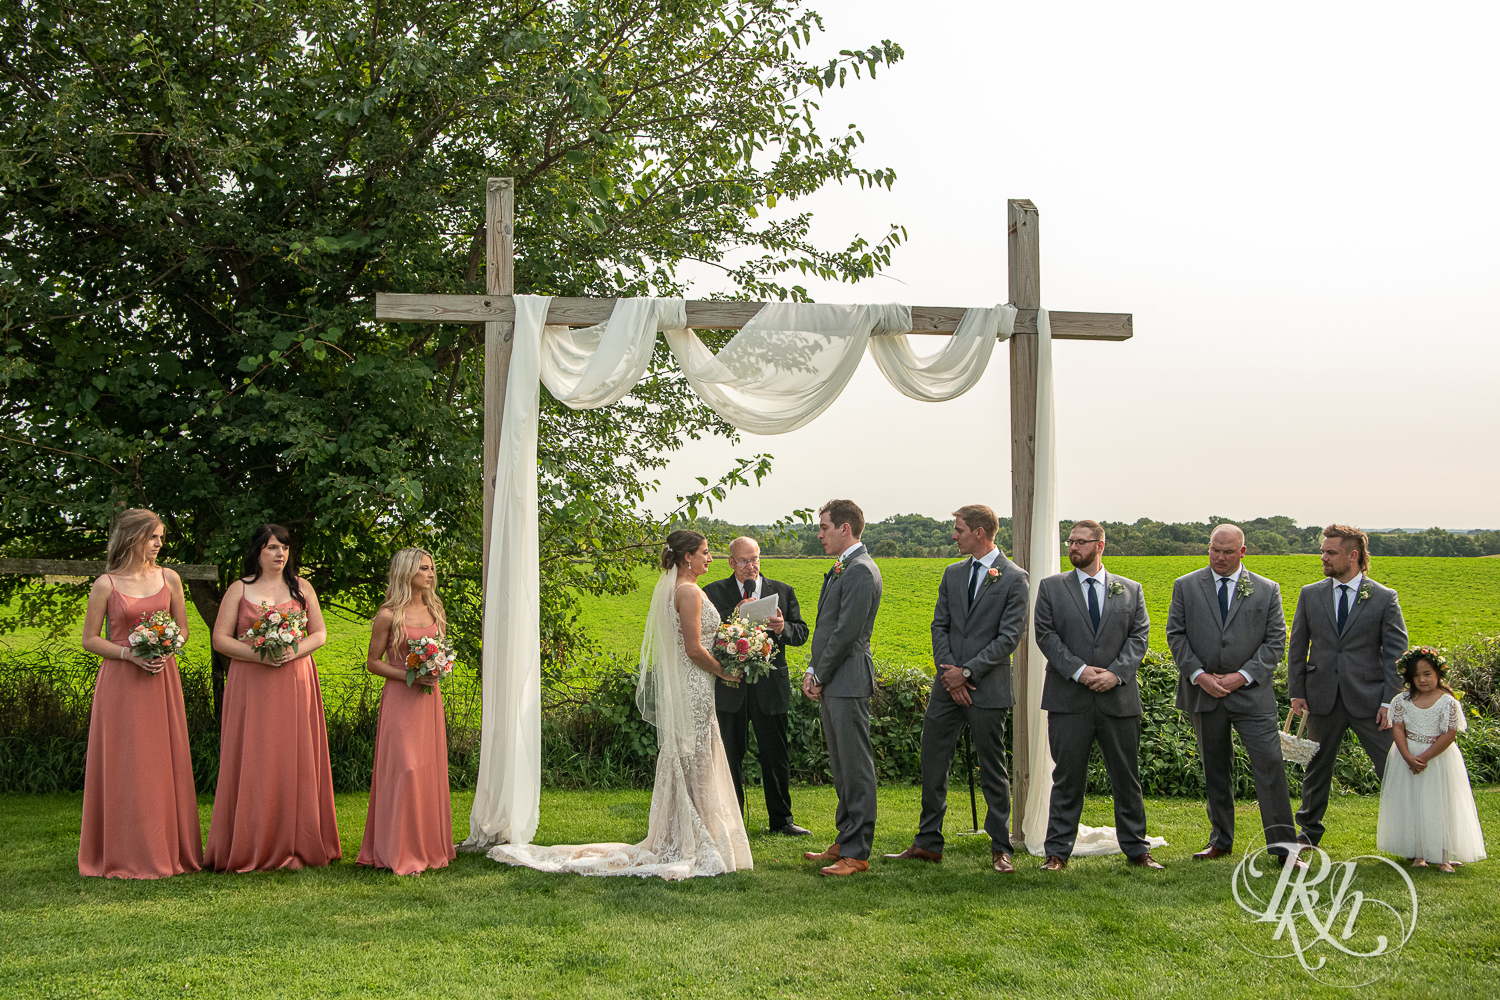 Bride and groom smile during wedding ceremony at Legacy Hills Farm in Welch, Minnesota.